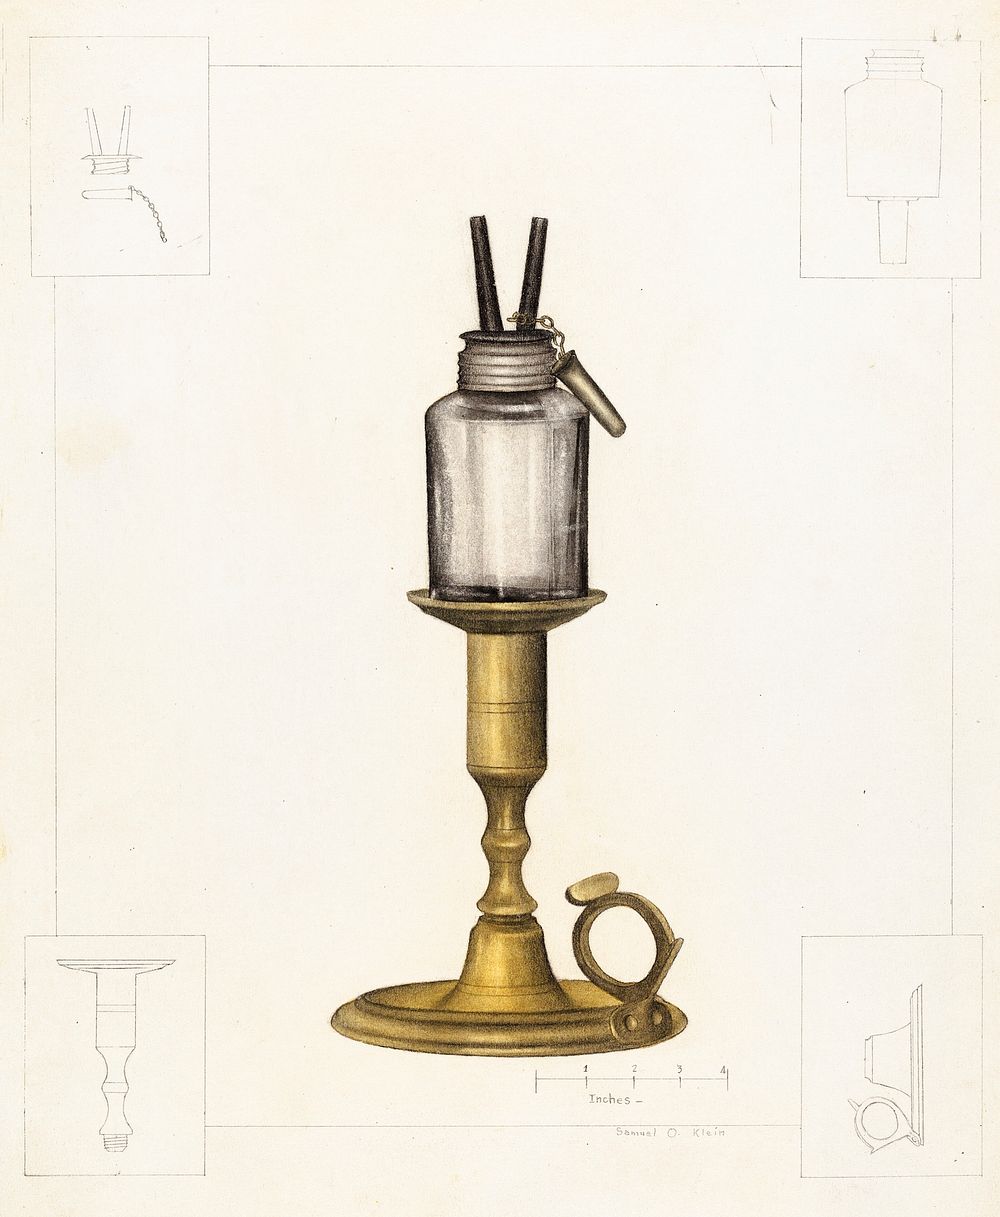 Peg Lamp (ca. 1937) by Samuel O. Klein. Original from The National Gallery of Art. Digitally enhanced by rawpixel.